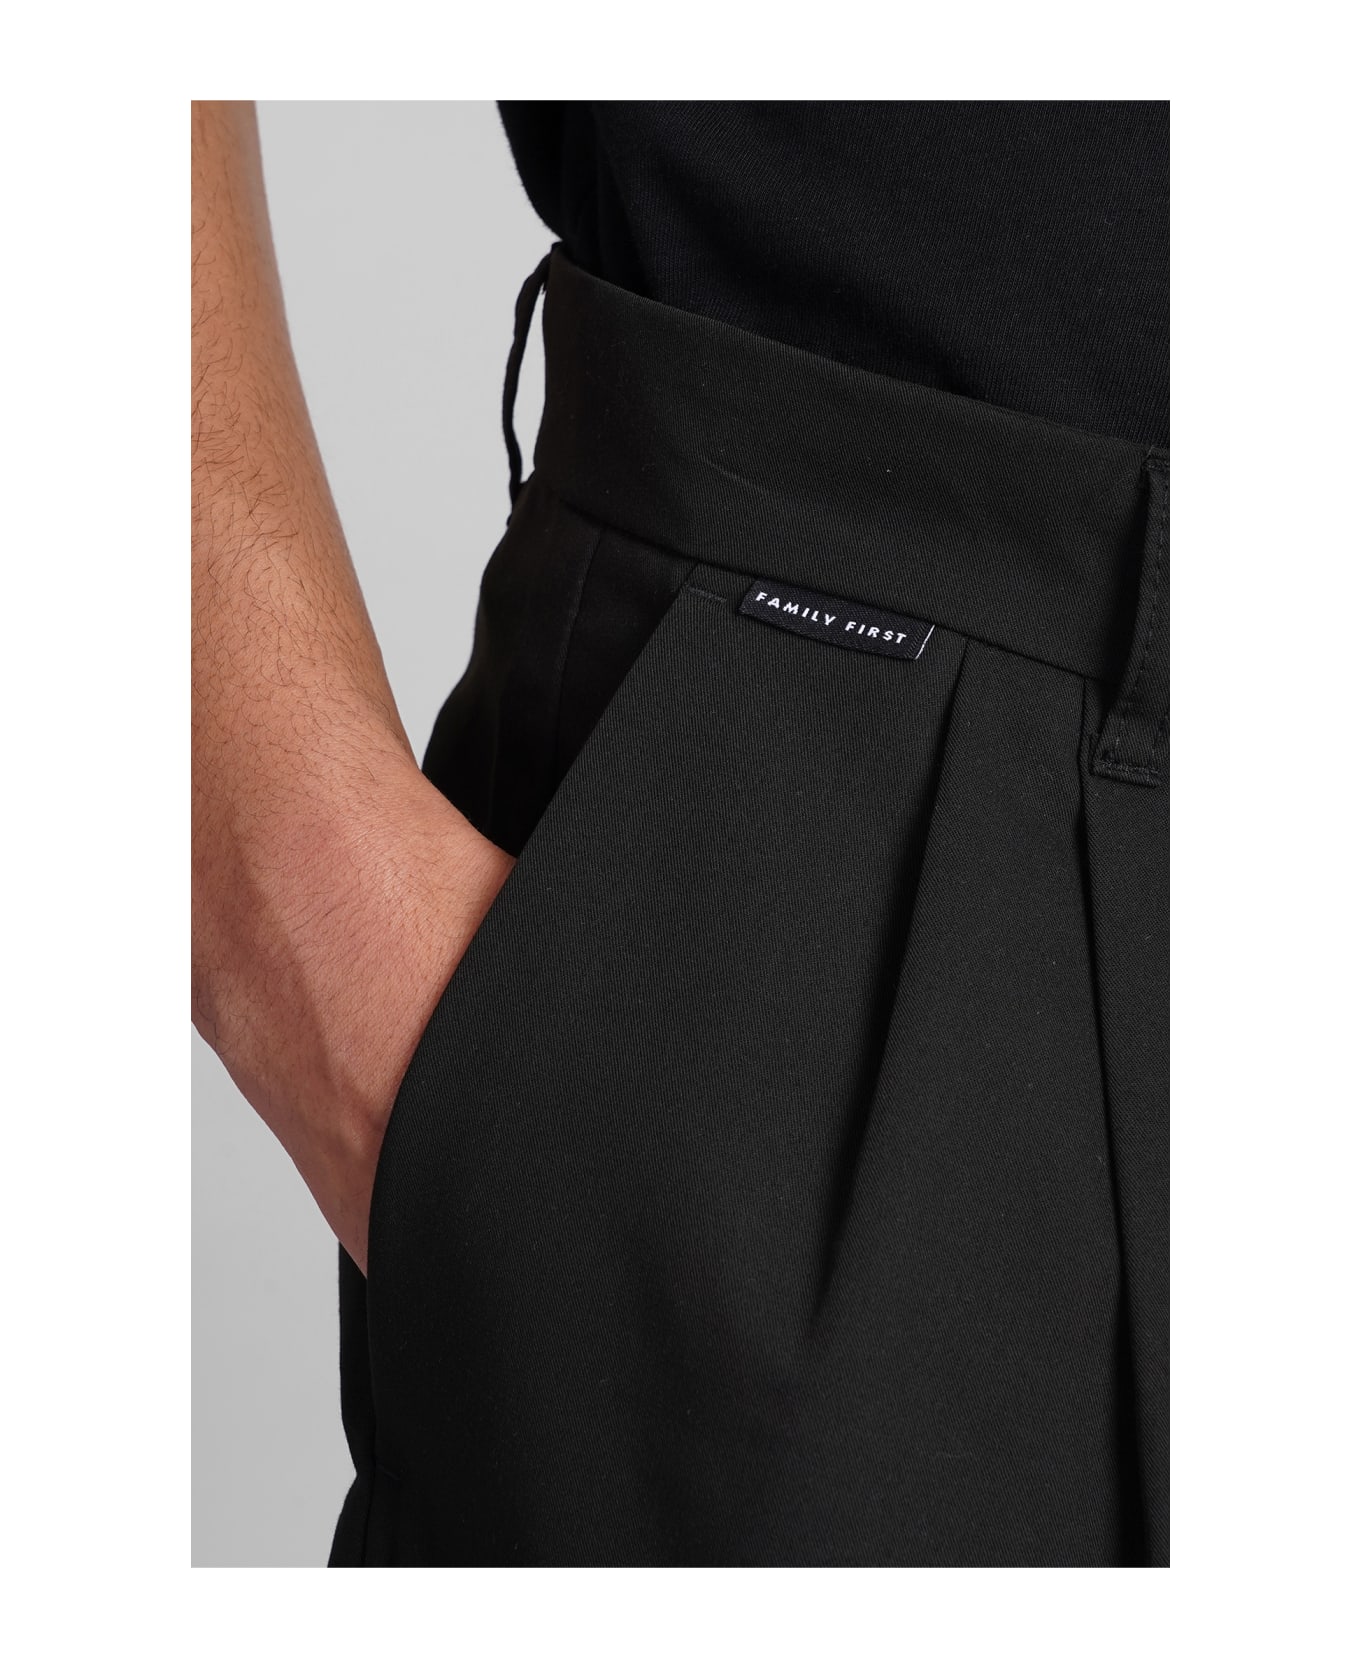 Family First Milano Shorts In Black Polyester - black